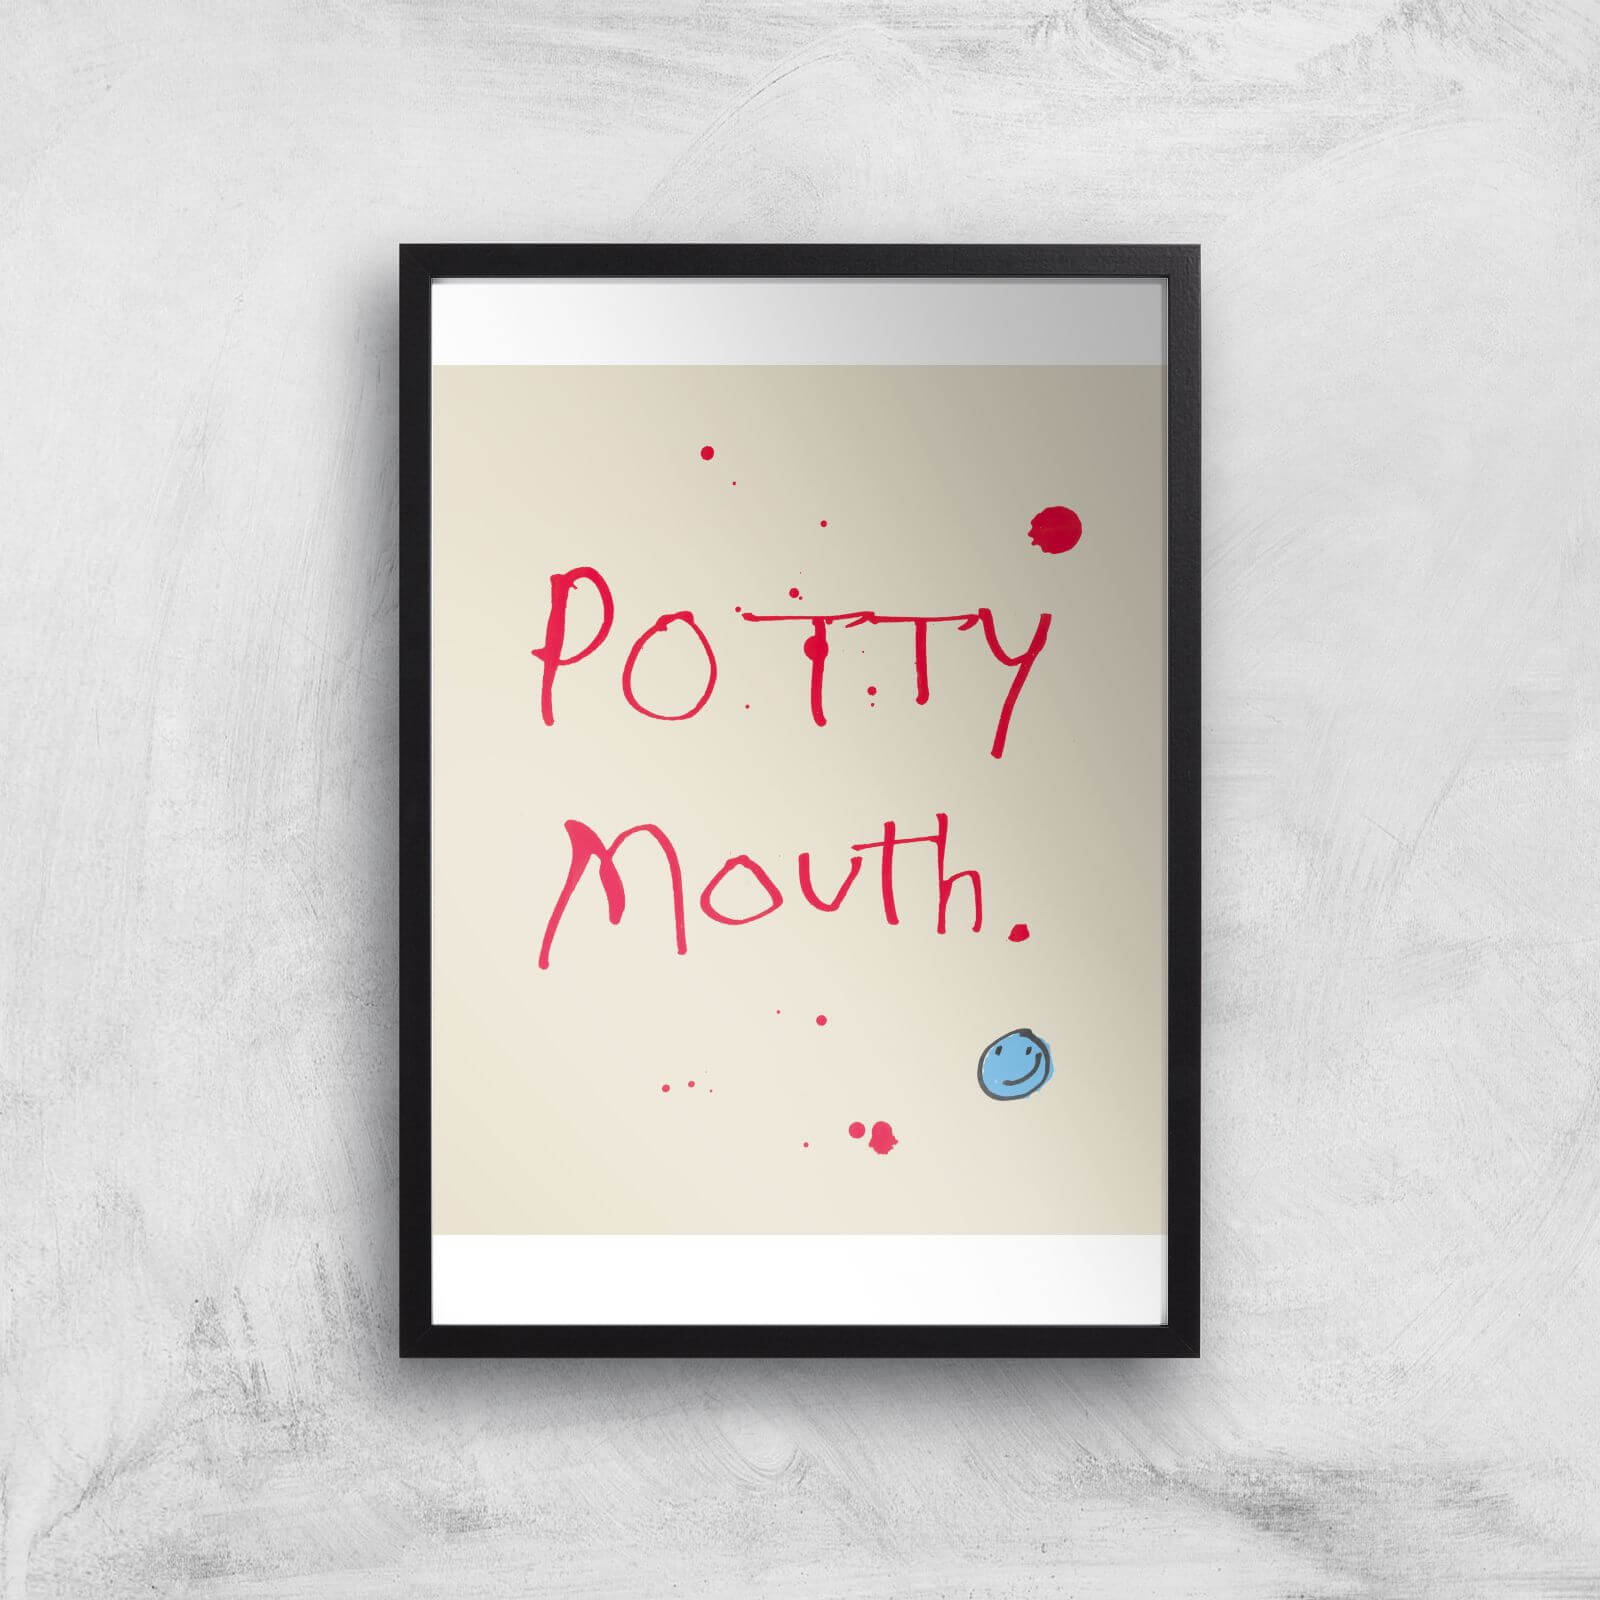 Poet and Painter Potty Mouth Giclee Art Print - A4 - Print Only